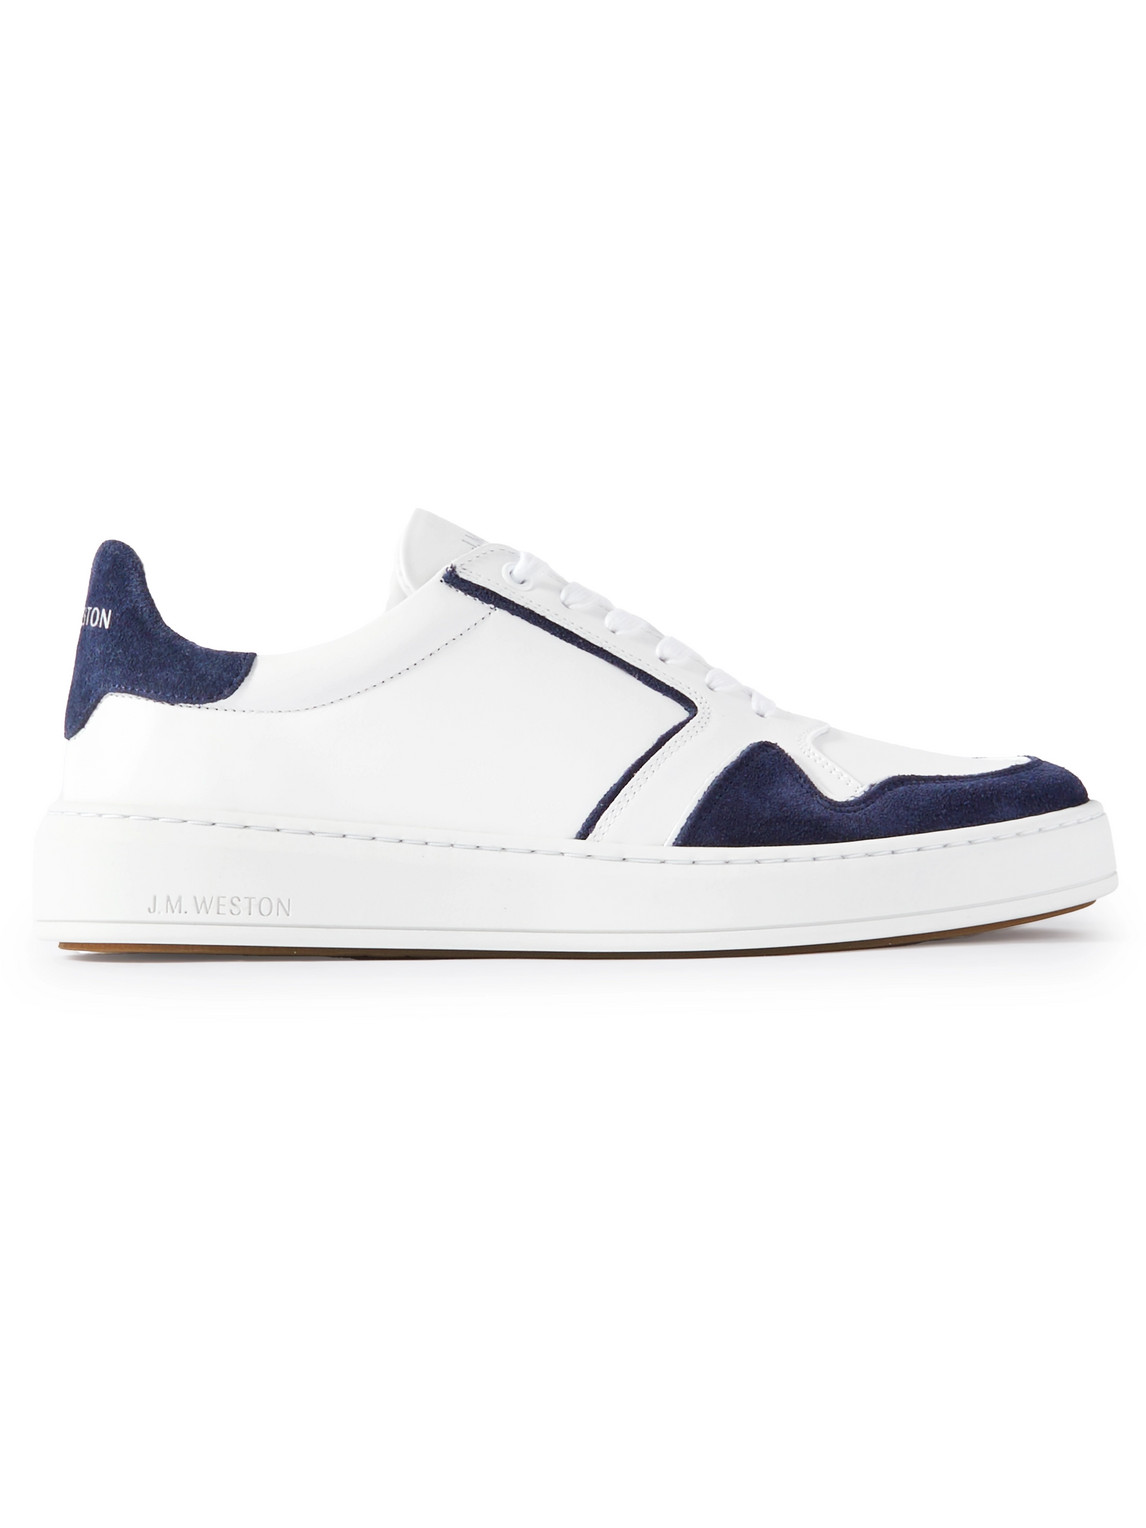 J.M. Weston On Time Oxford Suede-Trimmed Leather Sneakers